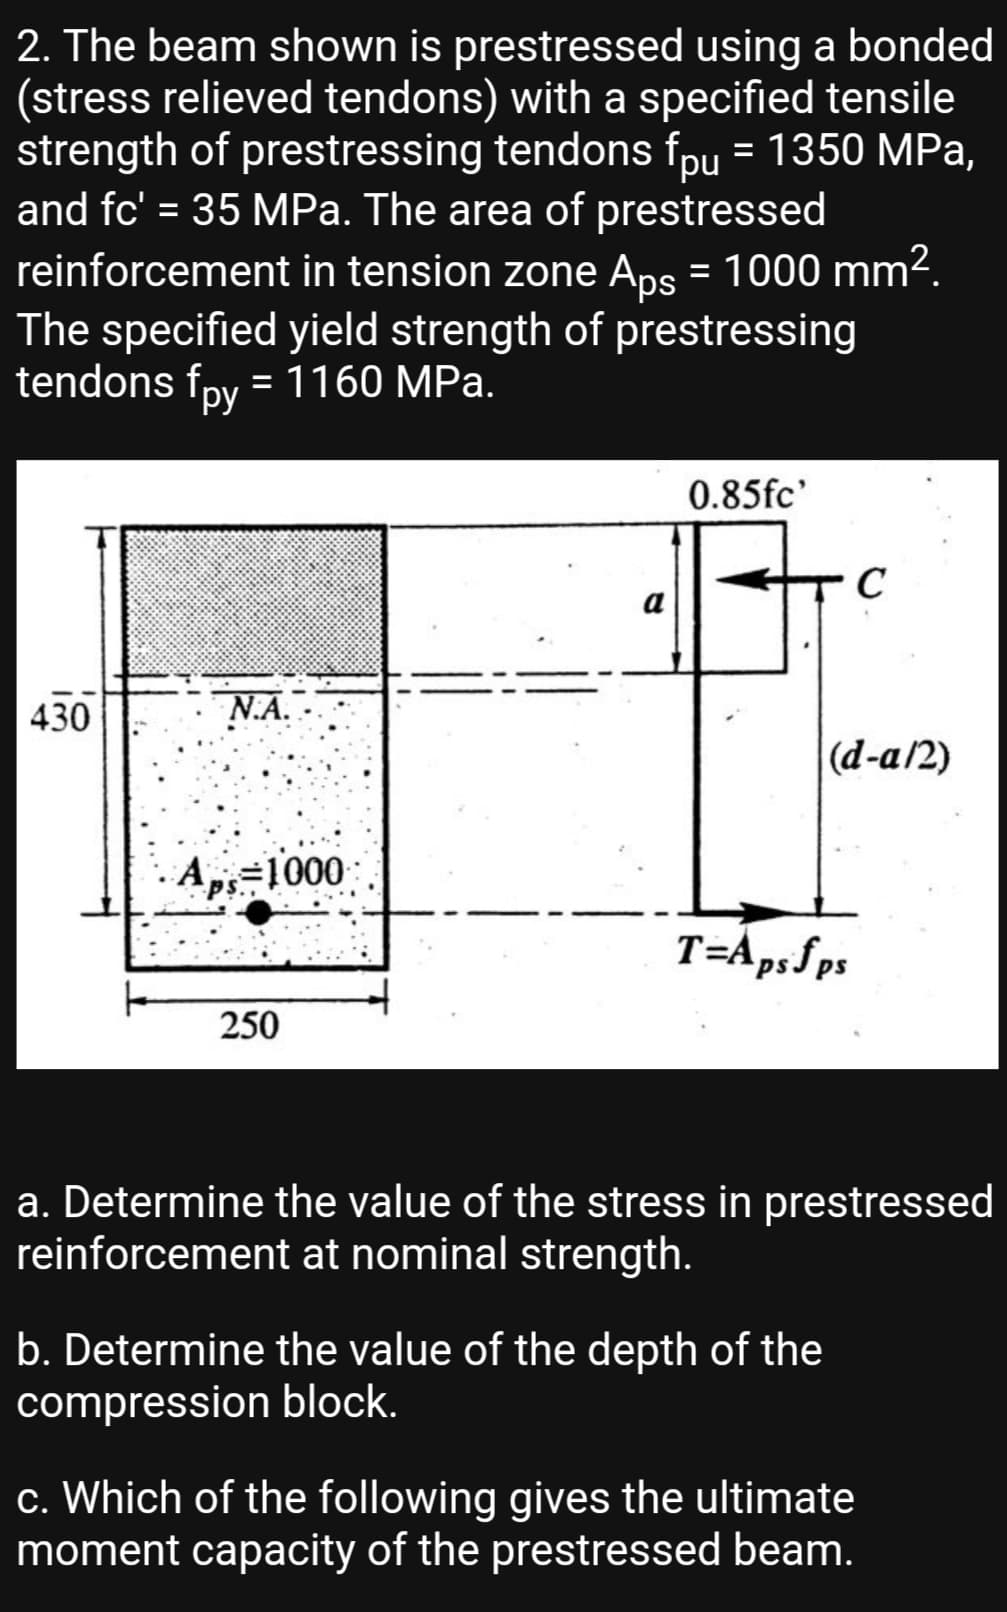 2. The beam shown is prestressed using a bonded
(stress relieved tendons) with a specified tensile
strength of prestressing tendons fpu = 1350 MPa,
and fc' = 35 MPa. The area of prestressed
reinforcement in tension zone Aps = 1000 mm2.
The specified yield strength of prestressing
tendons fpy =1160 MPa.
%3D
%3D
ру
0.85fc'
a
430
N.A.
|(d-a/2)
A=1000
T=Apsfps
250
a. Determine the value of the stress in prestressed
reinforcement at nominal strength.
b. Determine the value of the depth of the
compression block.
c. Which of the following gives the ultimate
moment capacity of the prestressed beam.
